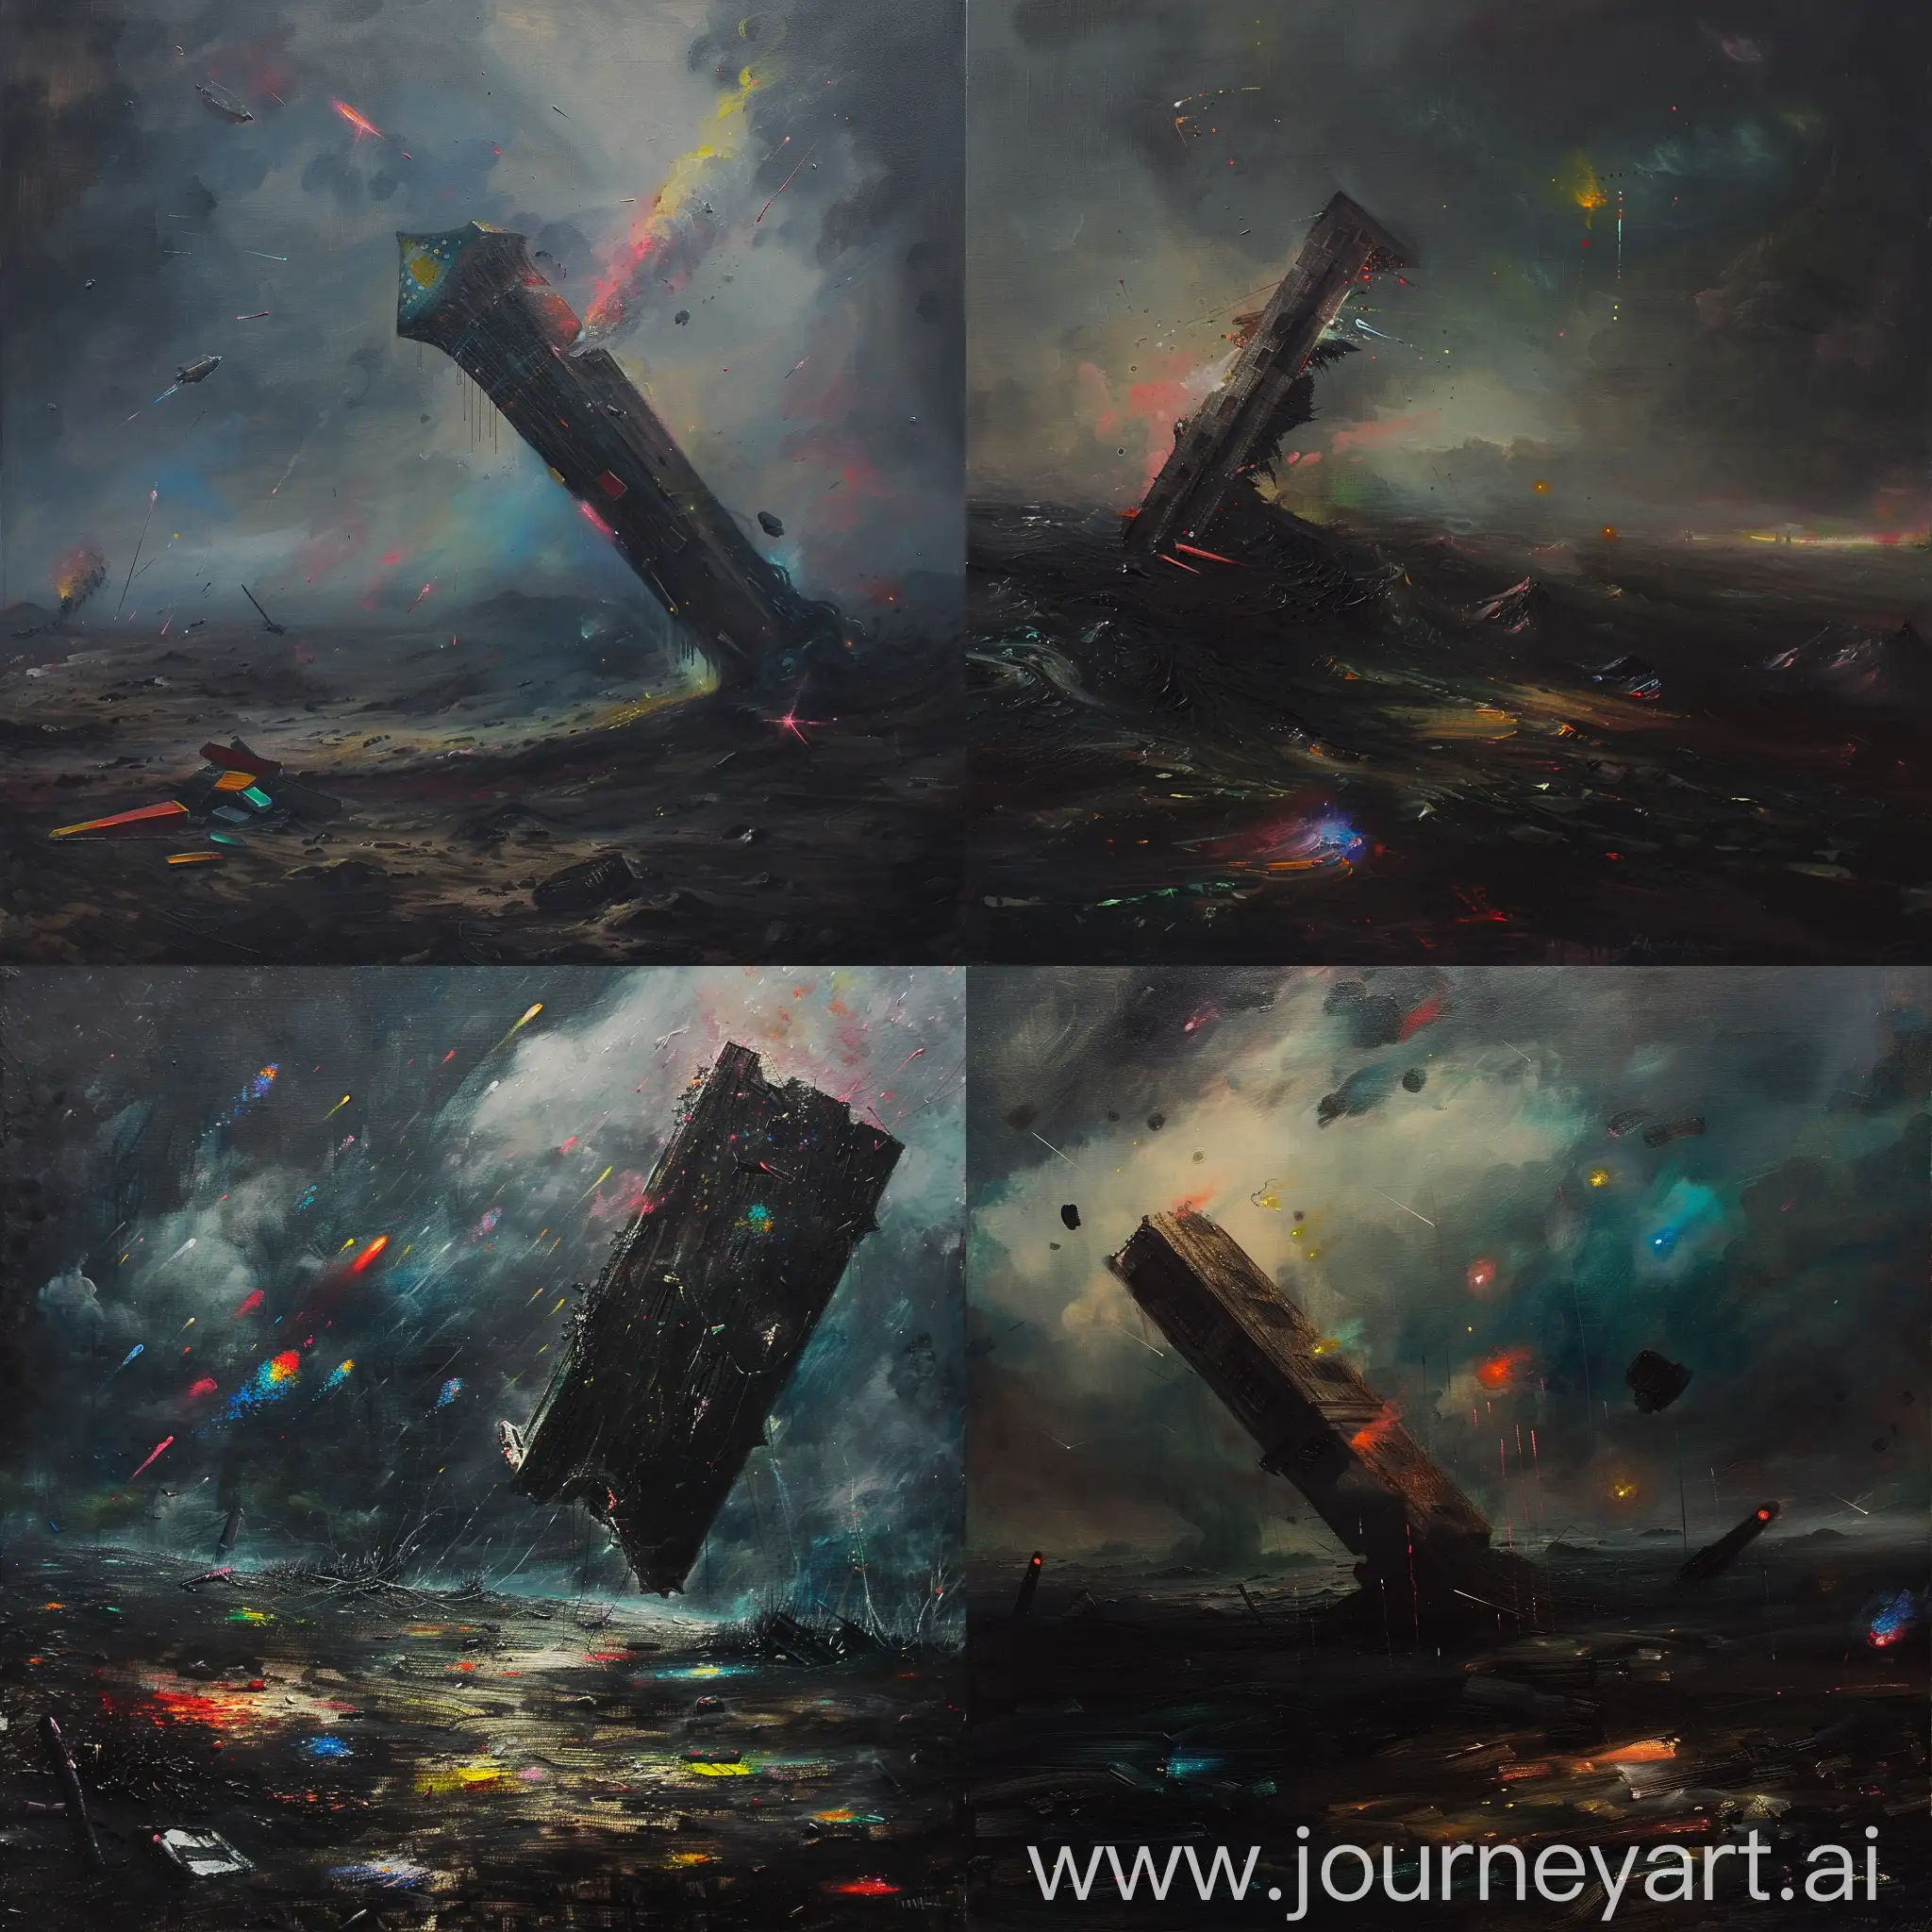 Stormy-Dreamscape-Ominous-Floating-Tower-Amidst-a-Whirlwind-of-Colors